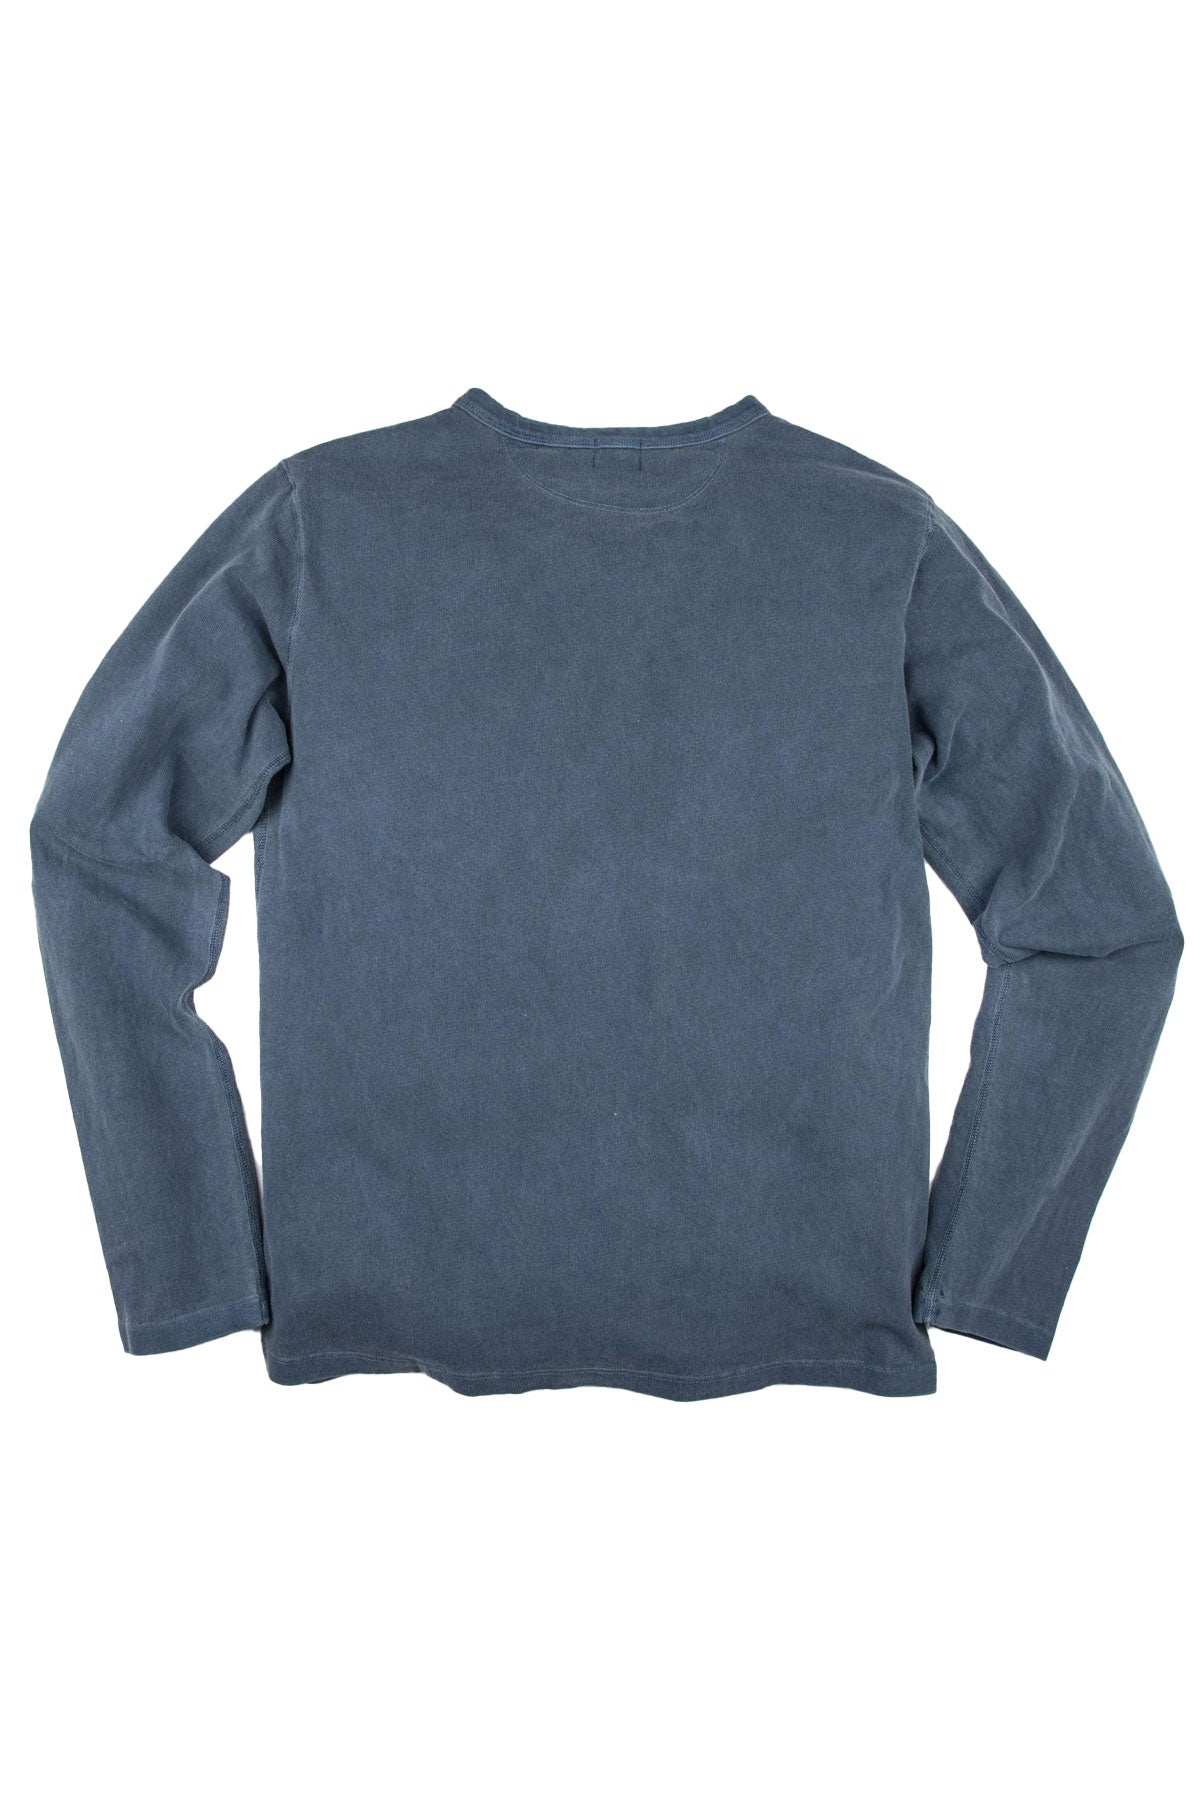 Freenote Cloth - 13 Ounce Henley - L/S Faded Blue